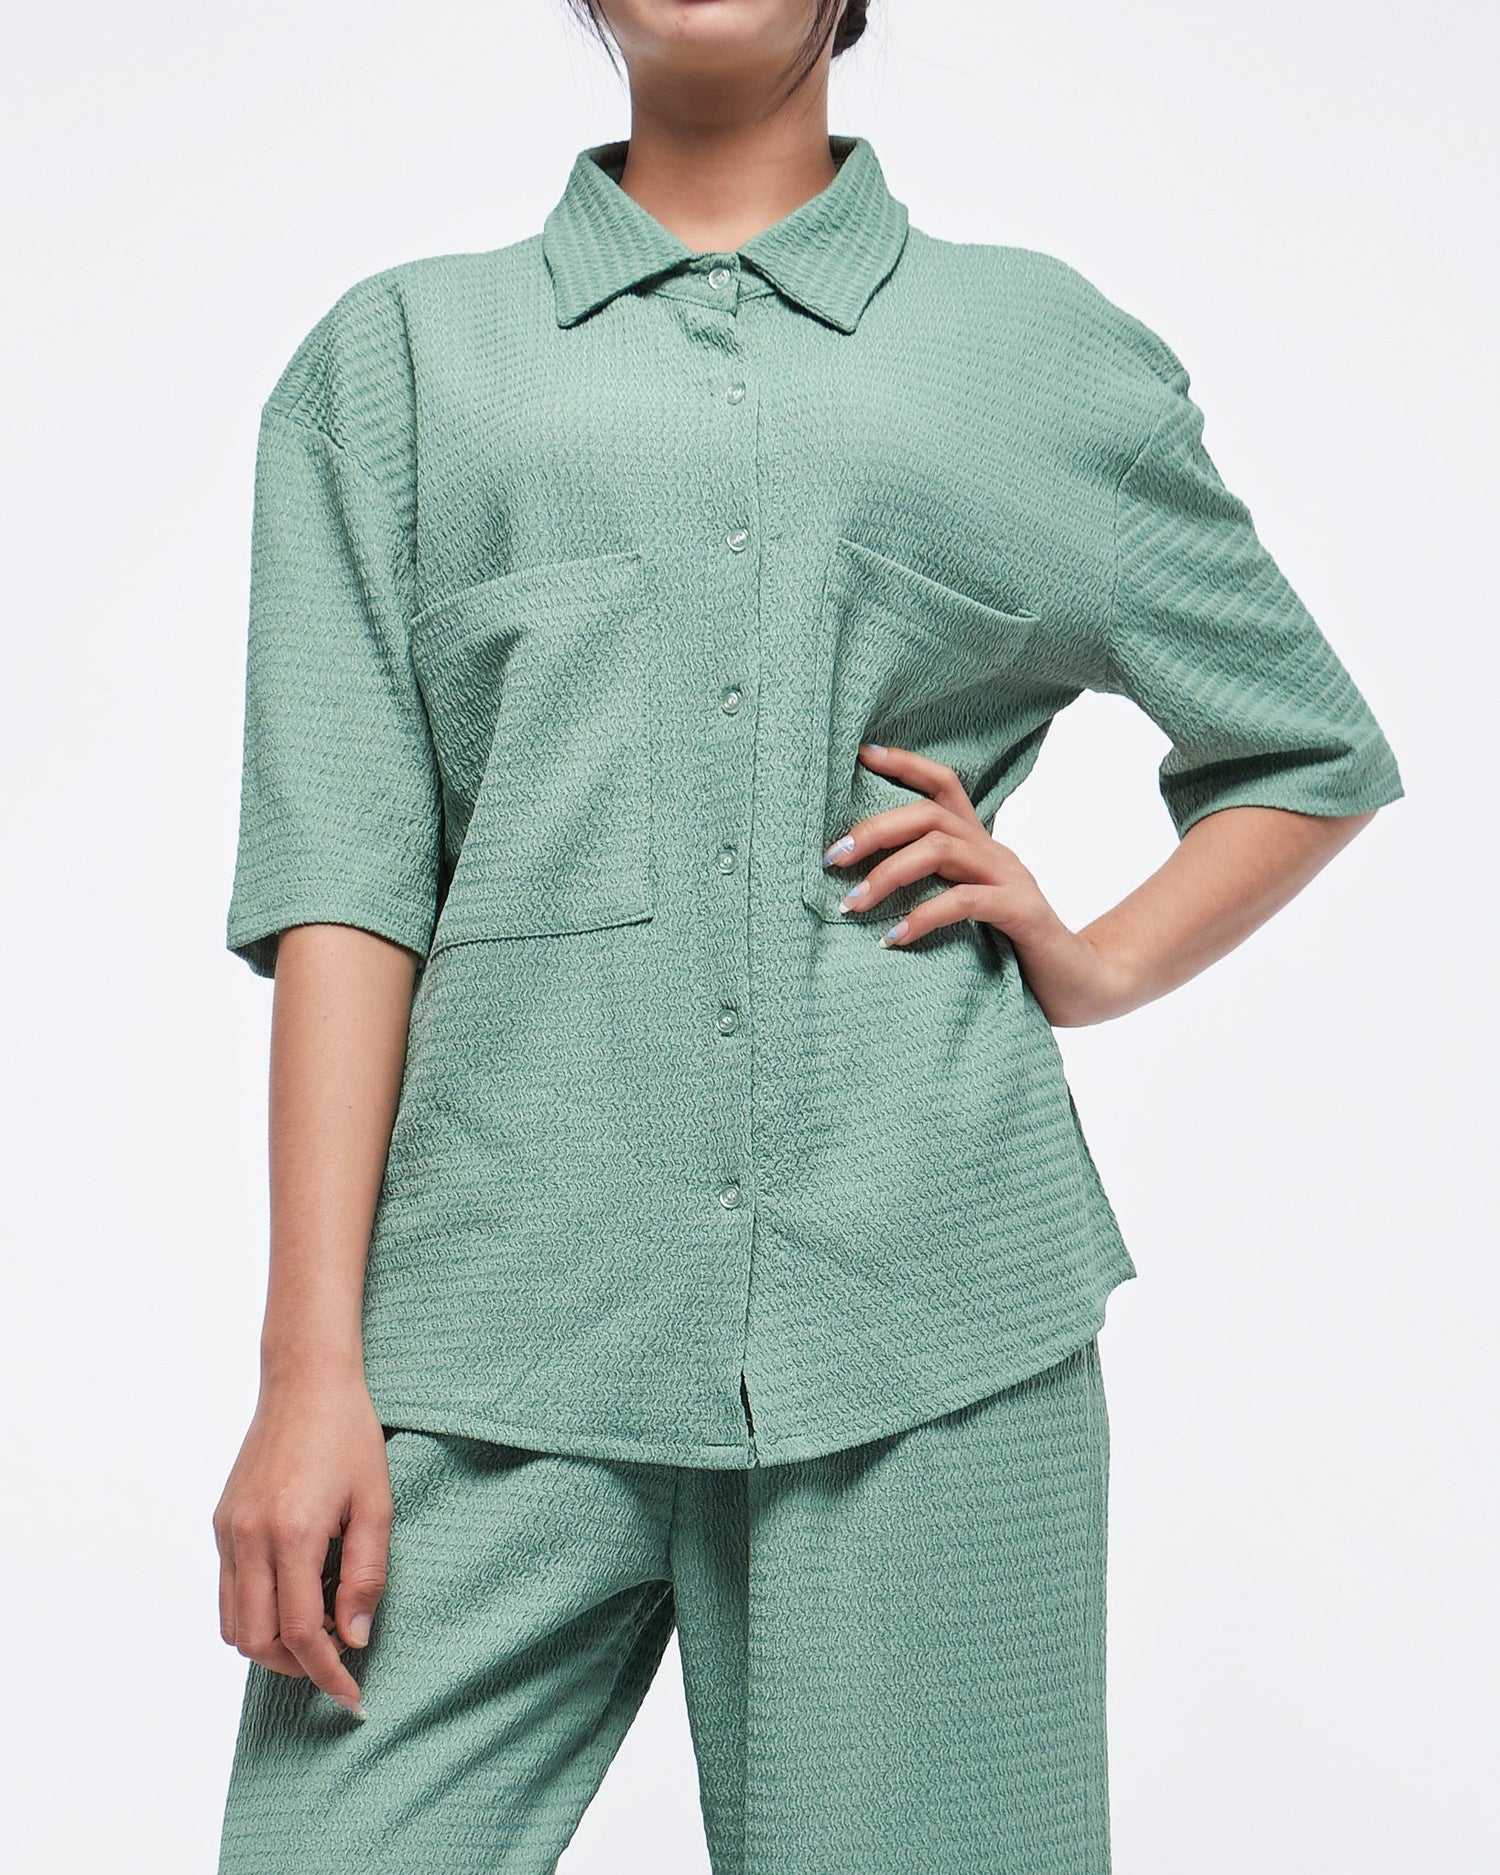 MOI OUTFIT-Front Pocket Lady Shirt Short Sleeve 12.90